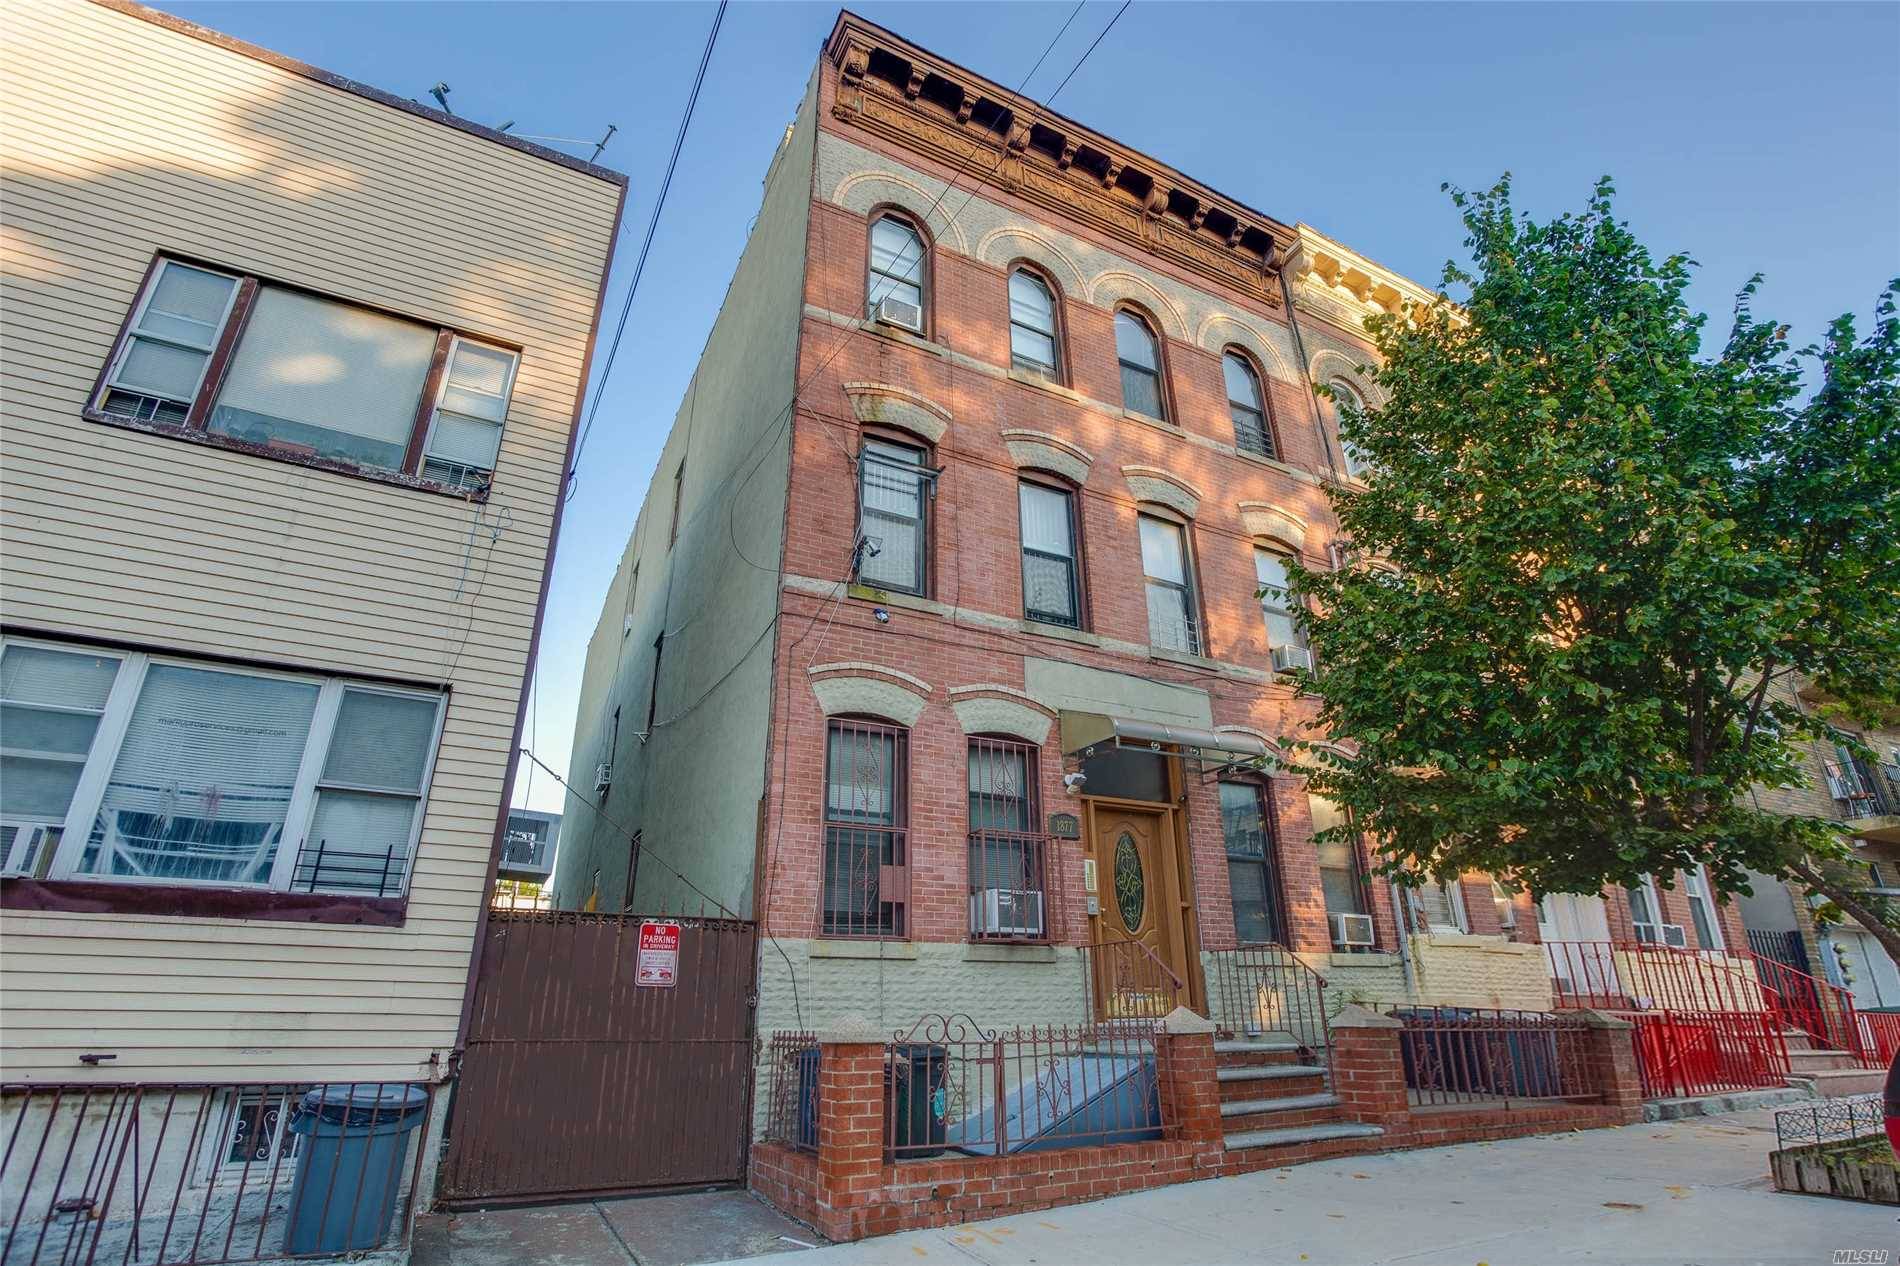 Greene Avenue Is A Classic Brick 6 Family Indicative Of Ridgewood's Style And Architecture.